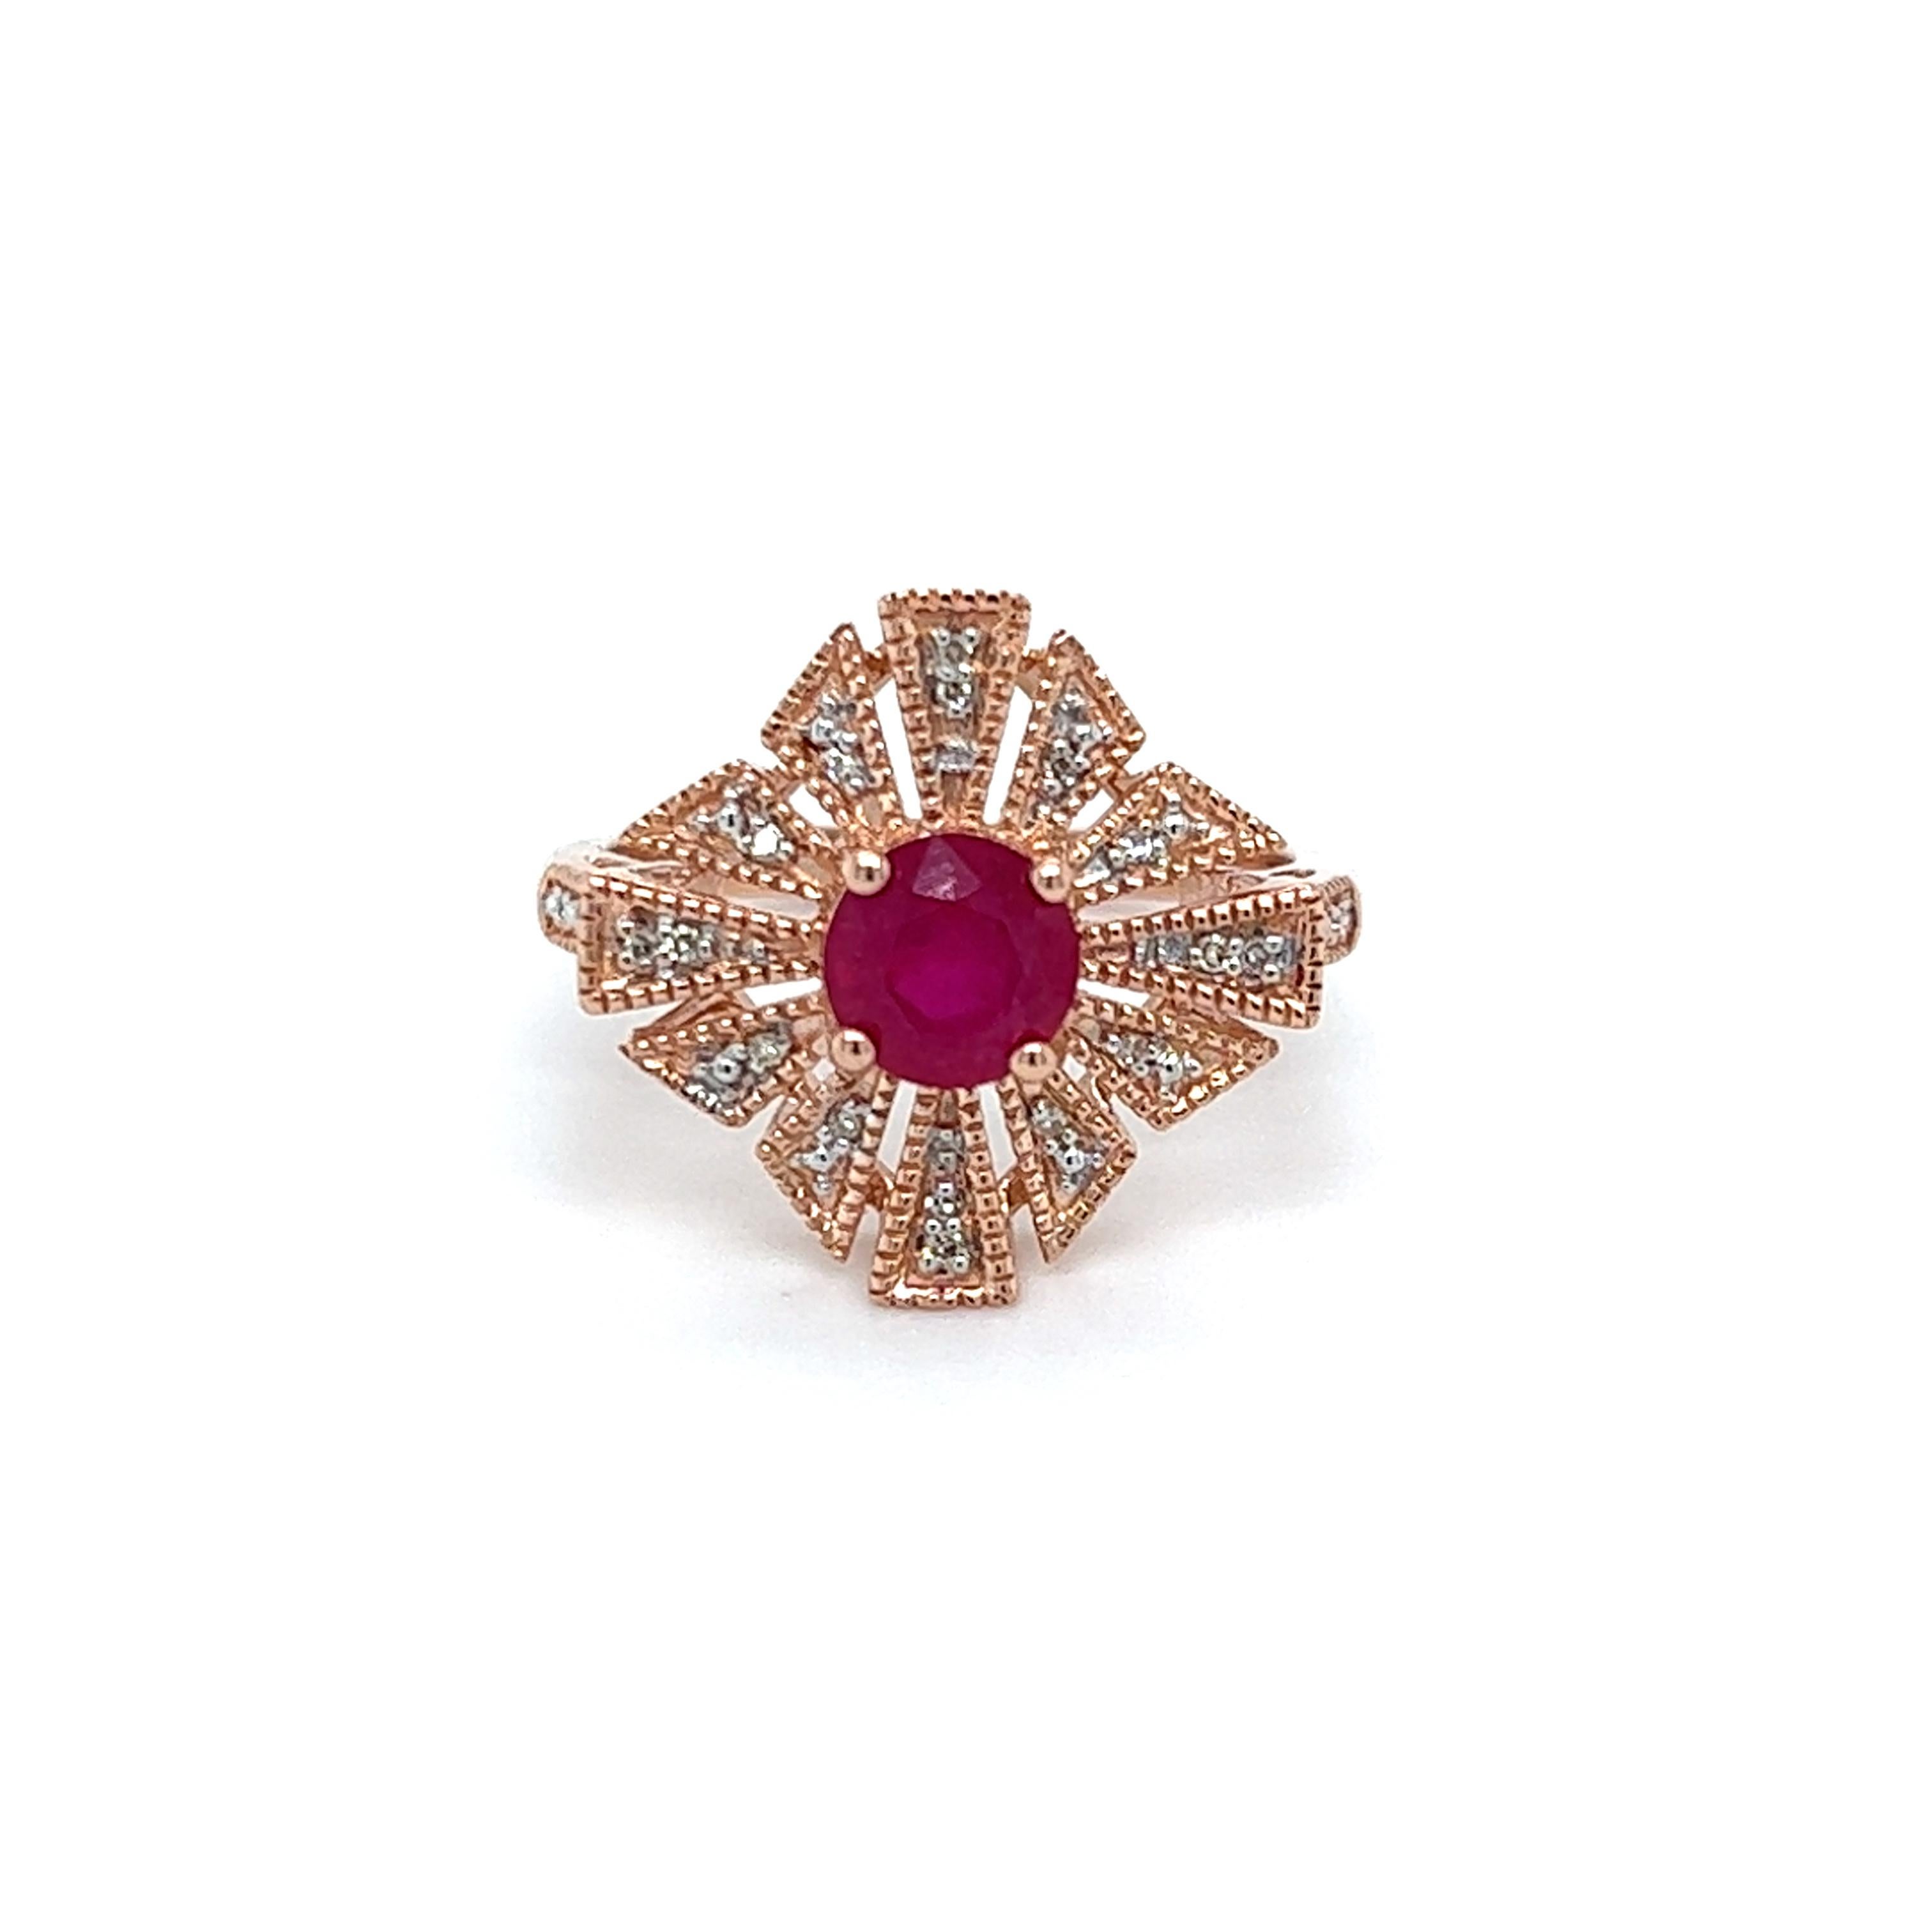 Contemporary Natural Ruby and Diamond Ring in 14K Rose Gold